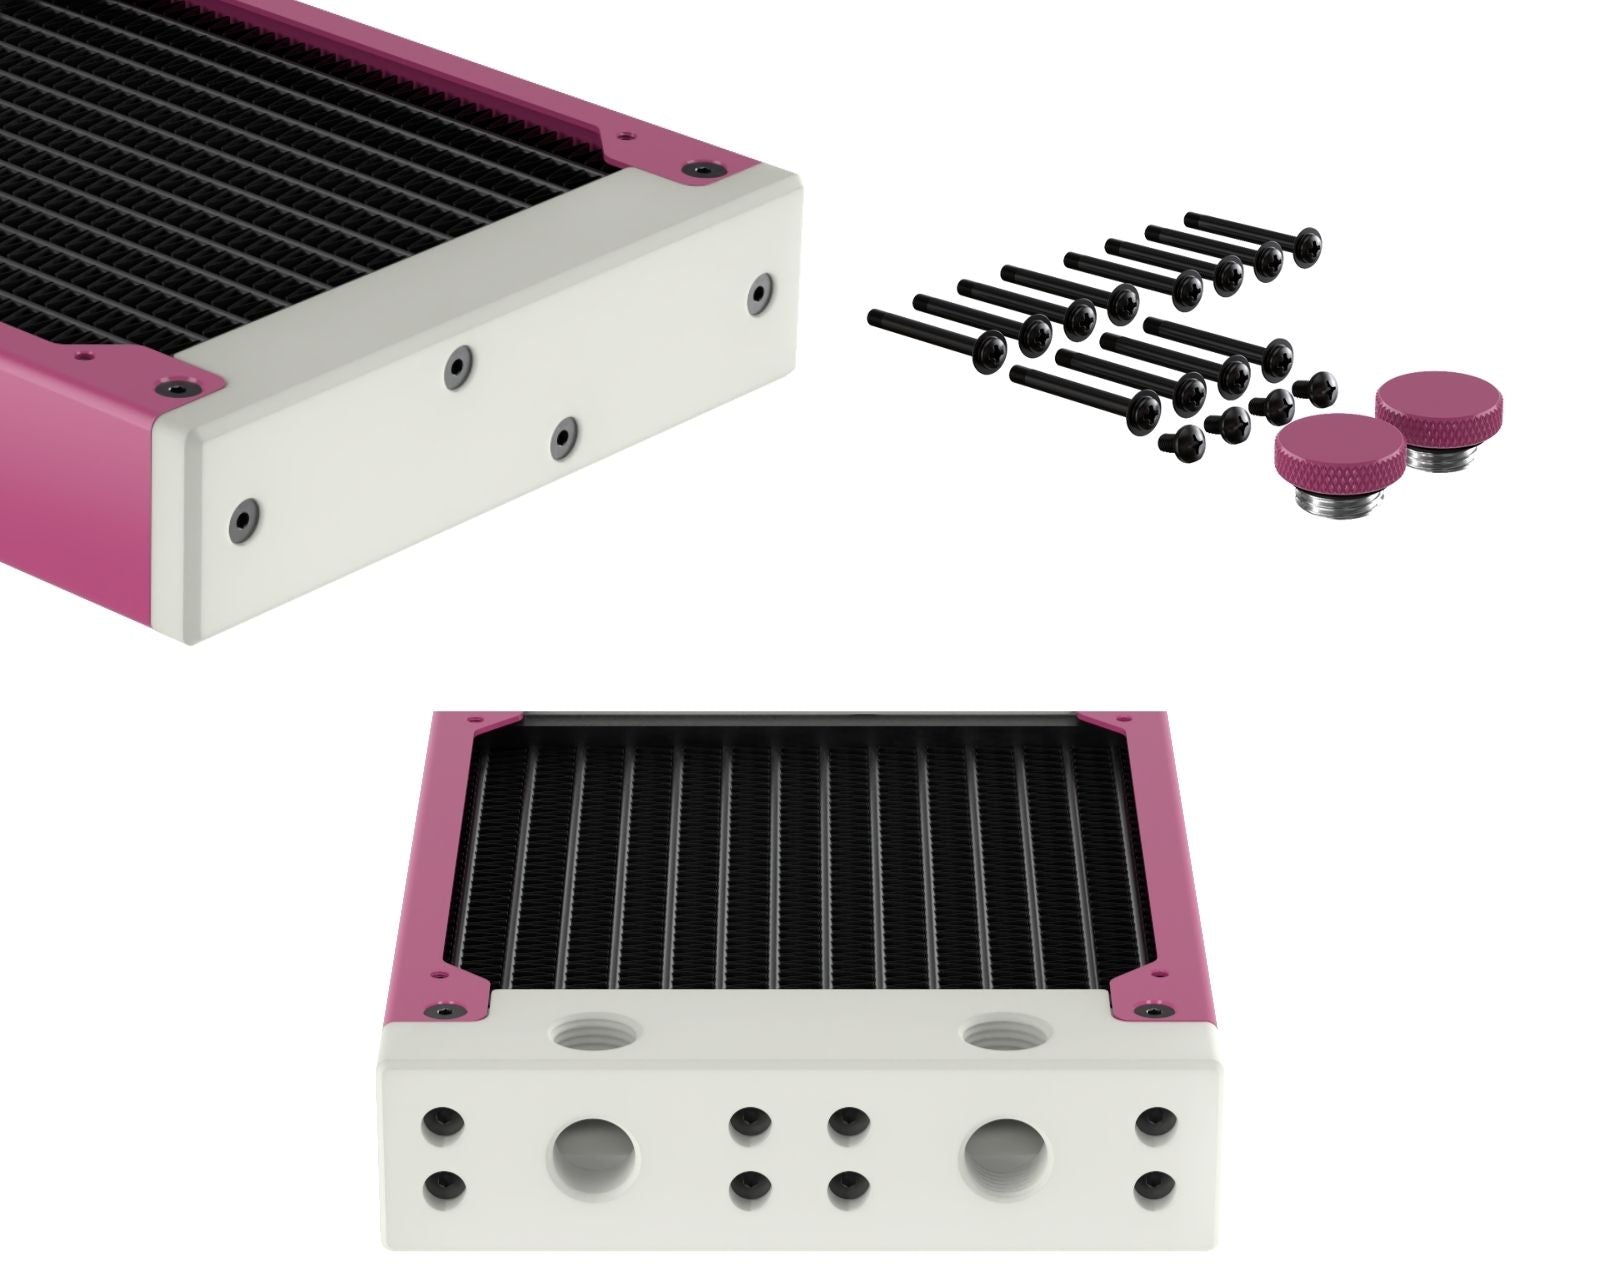 PrimoChill 360SL (30mm) EXIMO Modular Radiator, White POM, 3x120mm, Triple Fan (R-SL-W36) Available in 20+ Colors, Assembled in USA and Custom Watercooling Loop Ready - Magenta